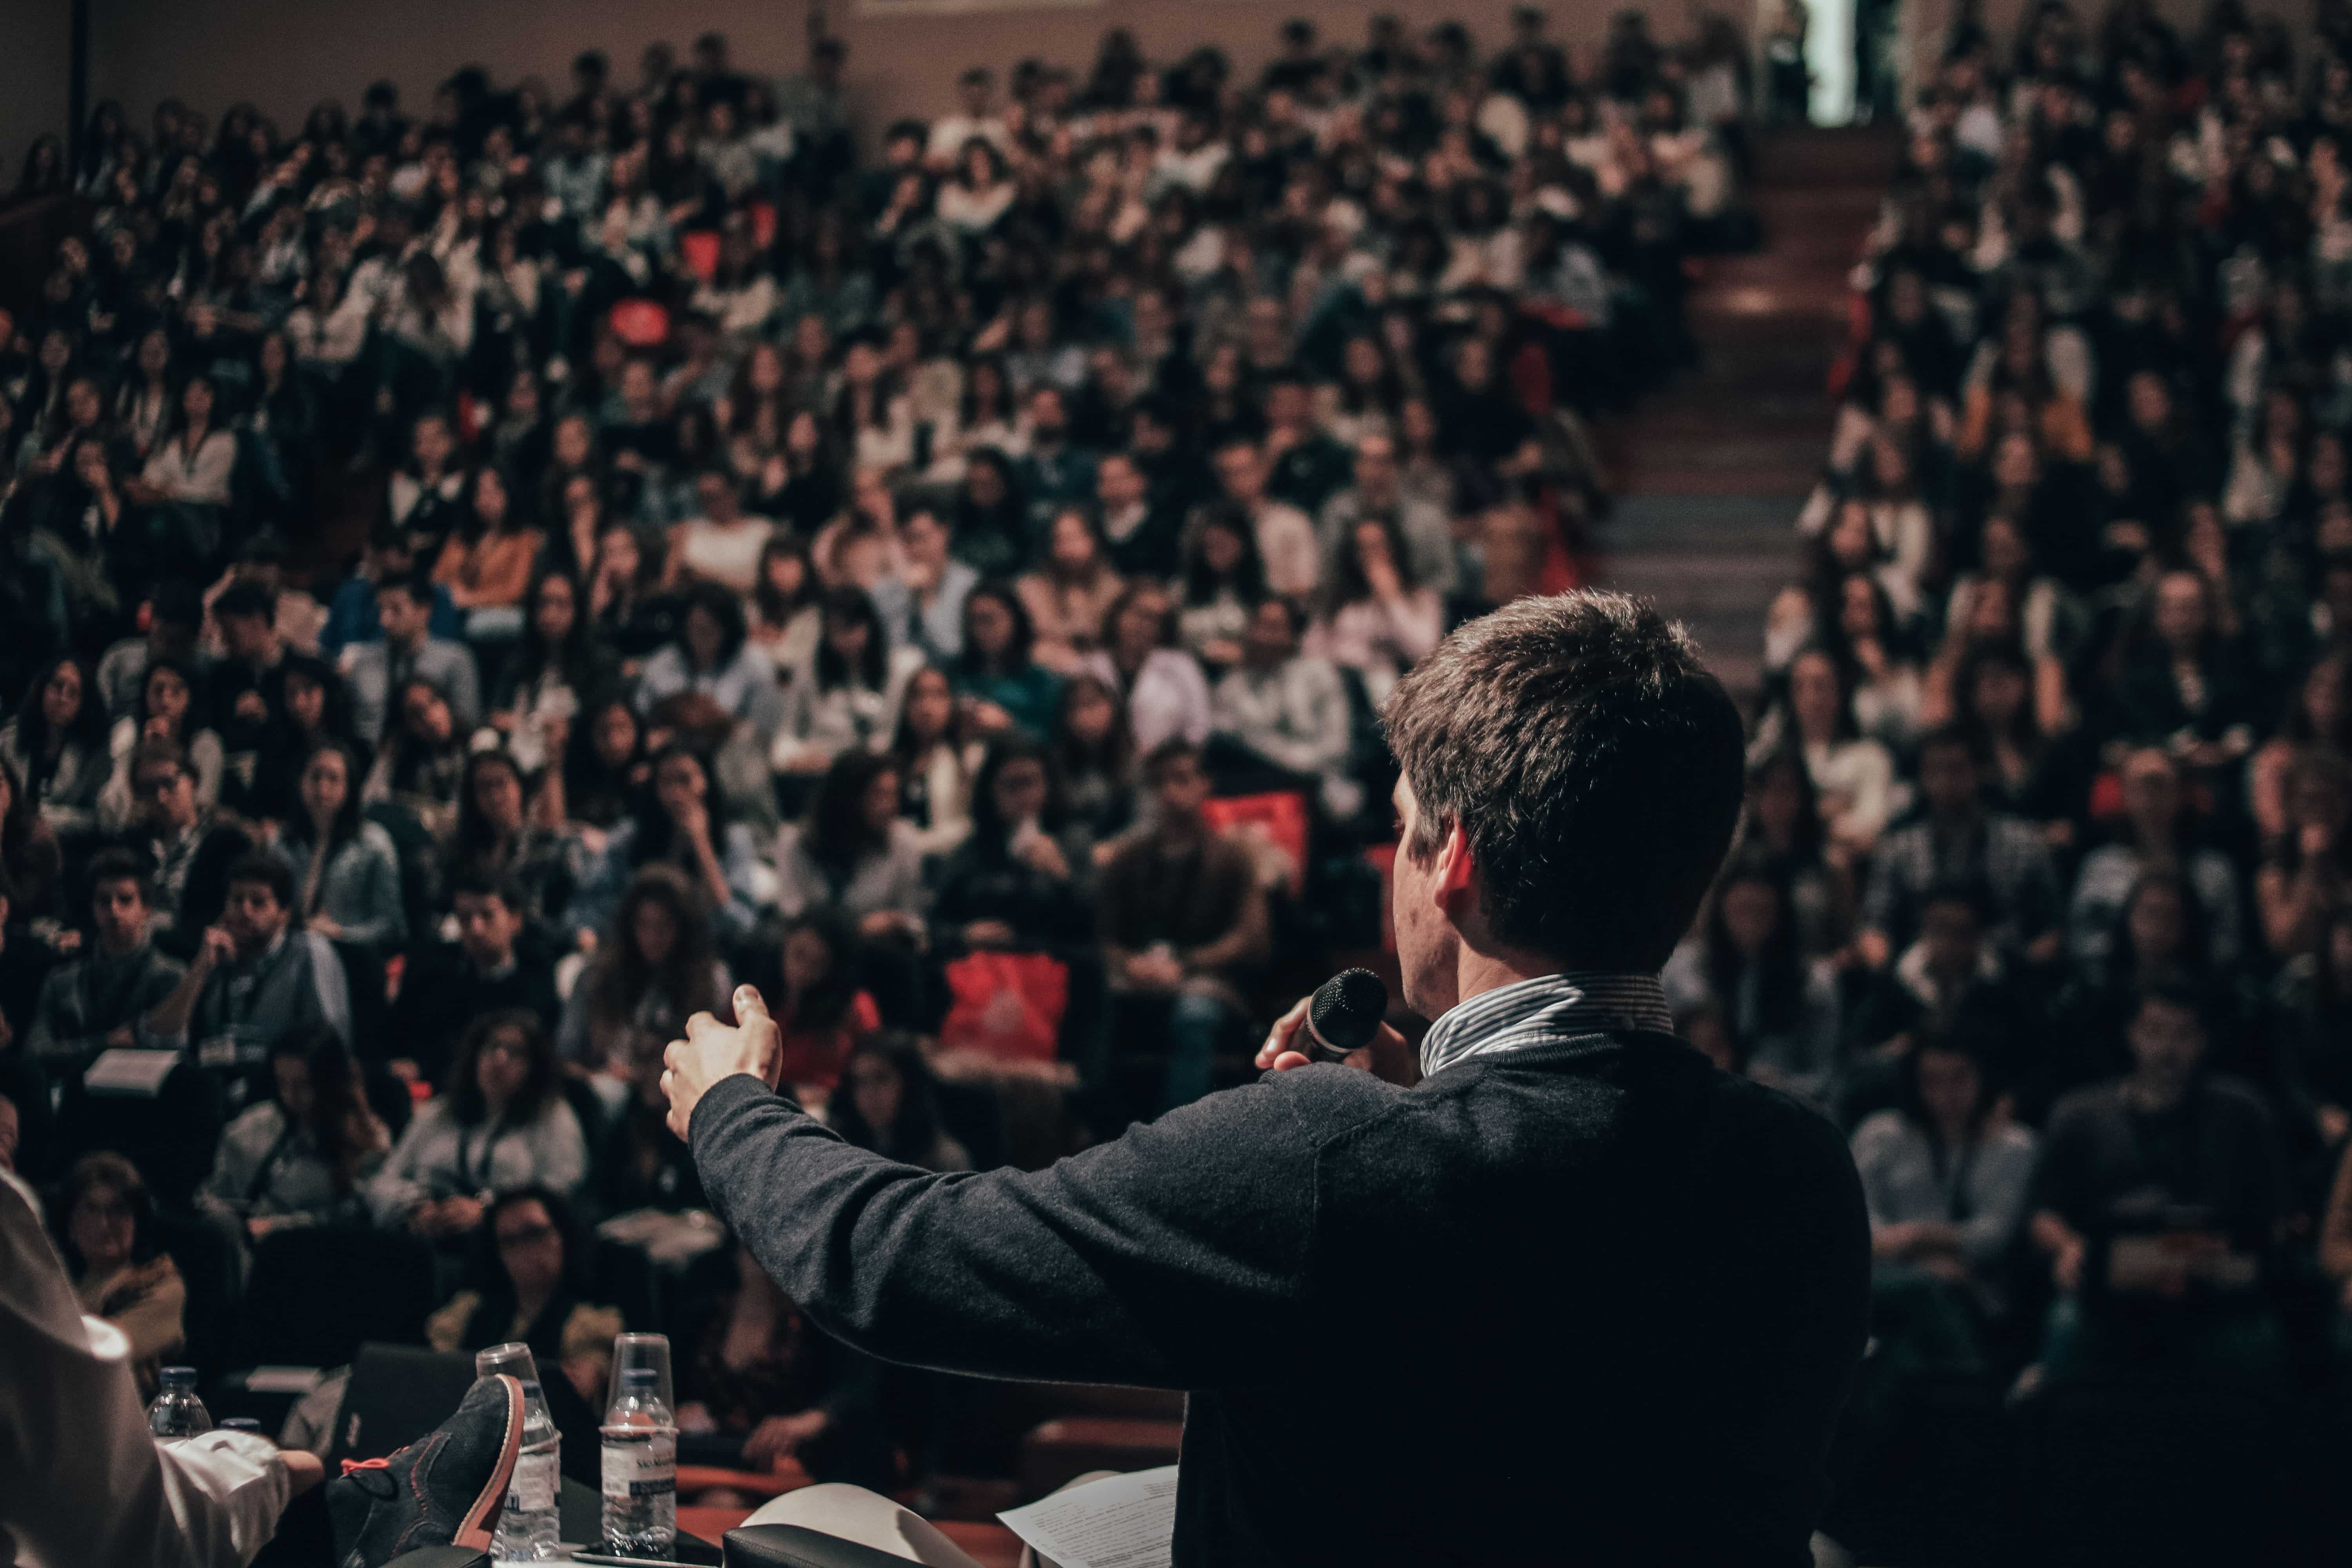 A man delivers a speech in front of a crowded auditorium